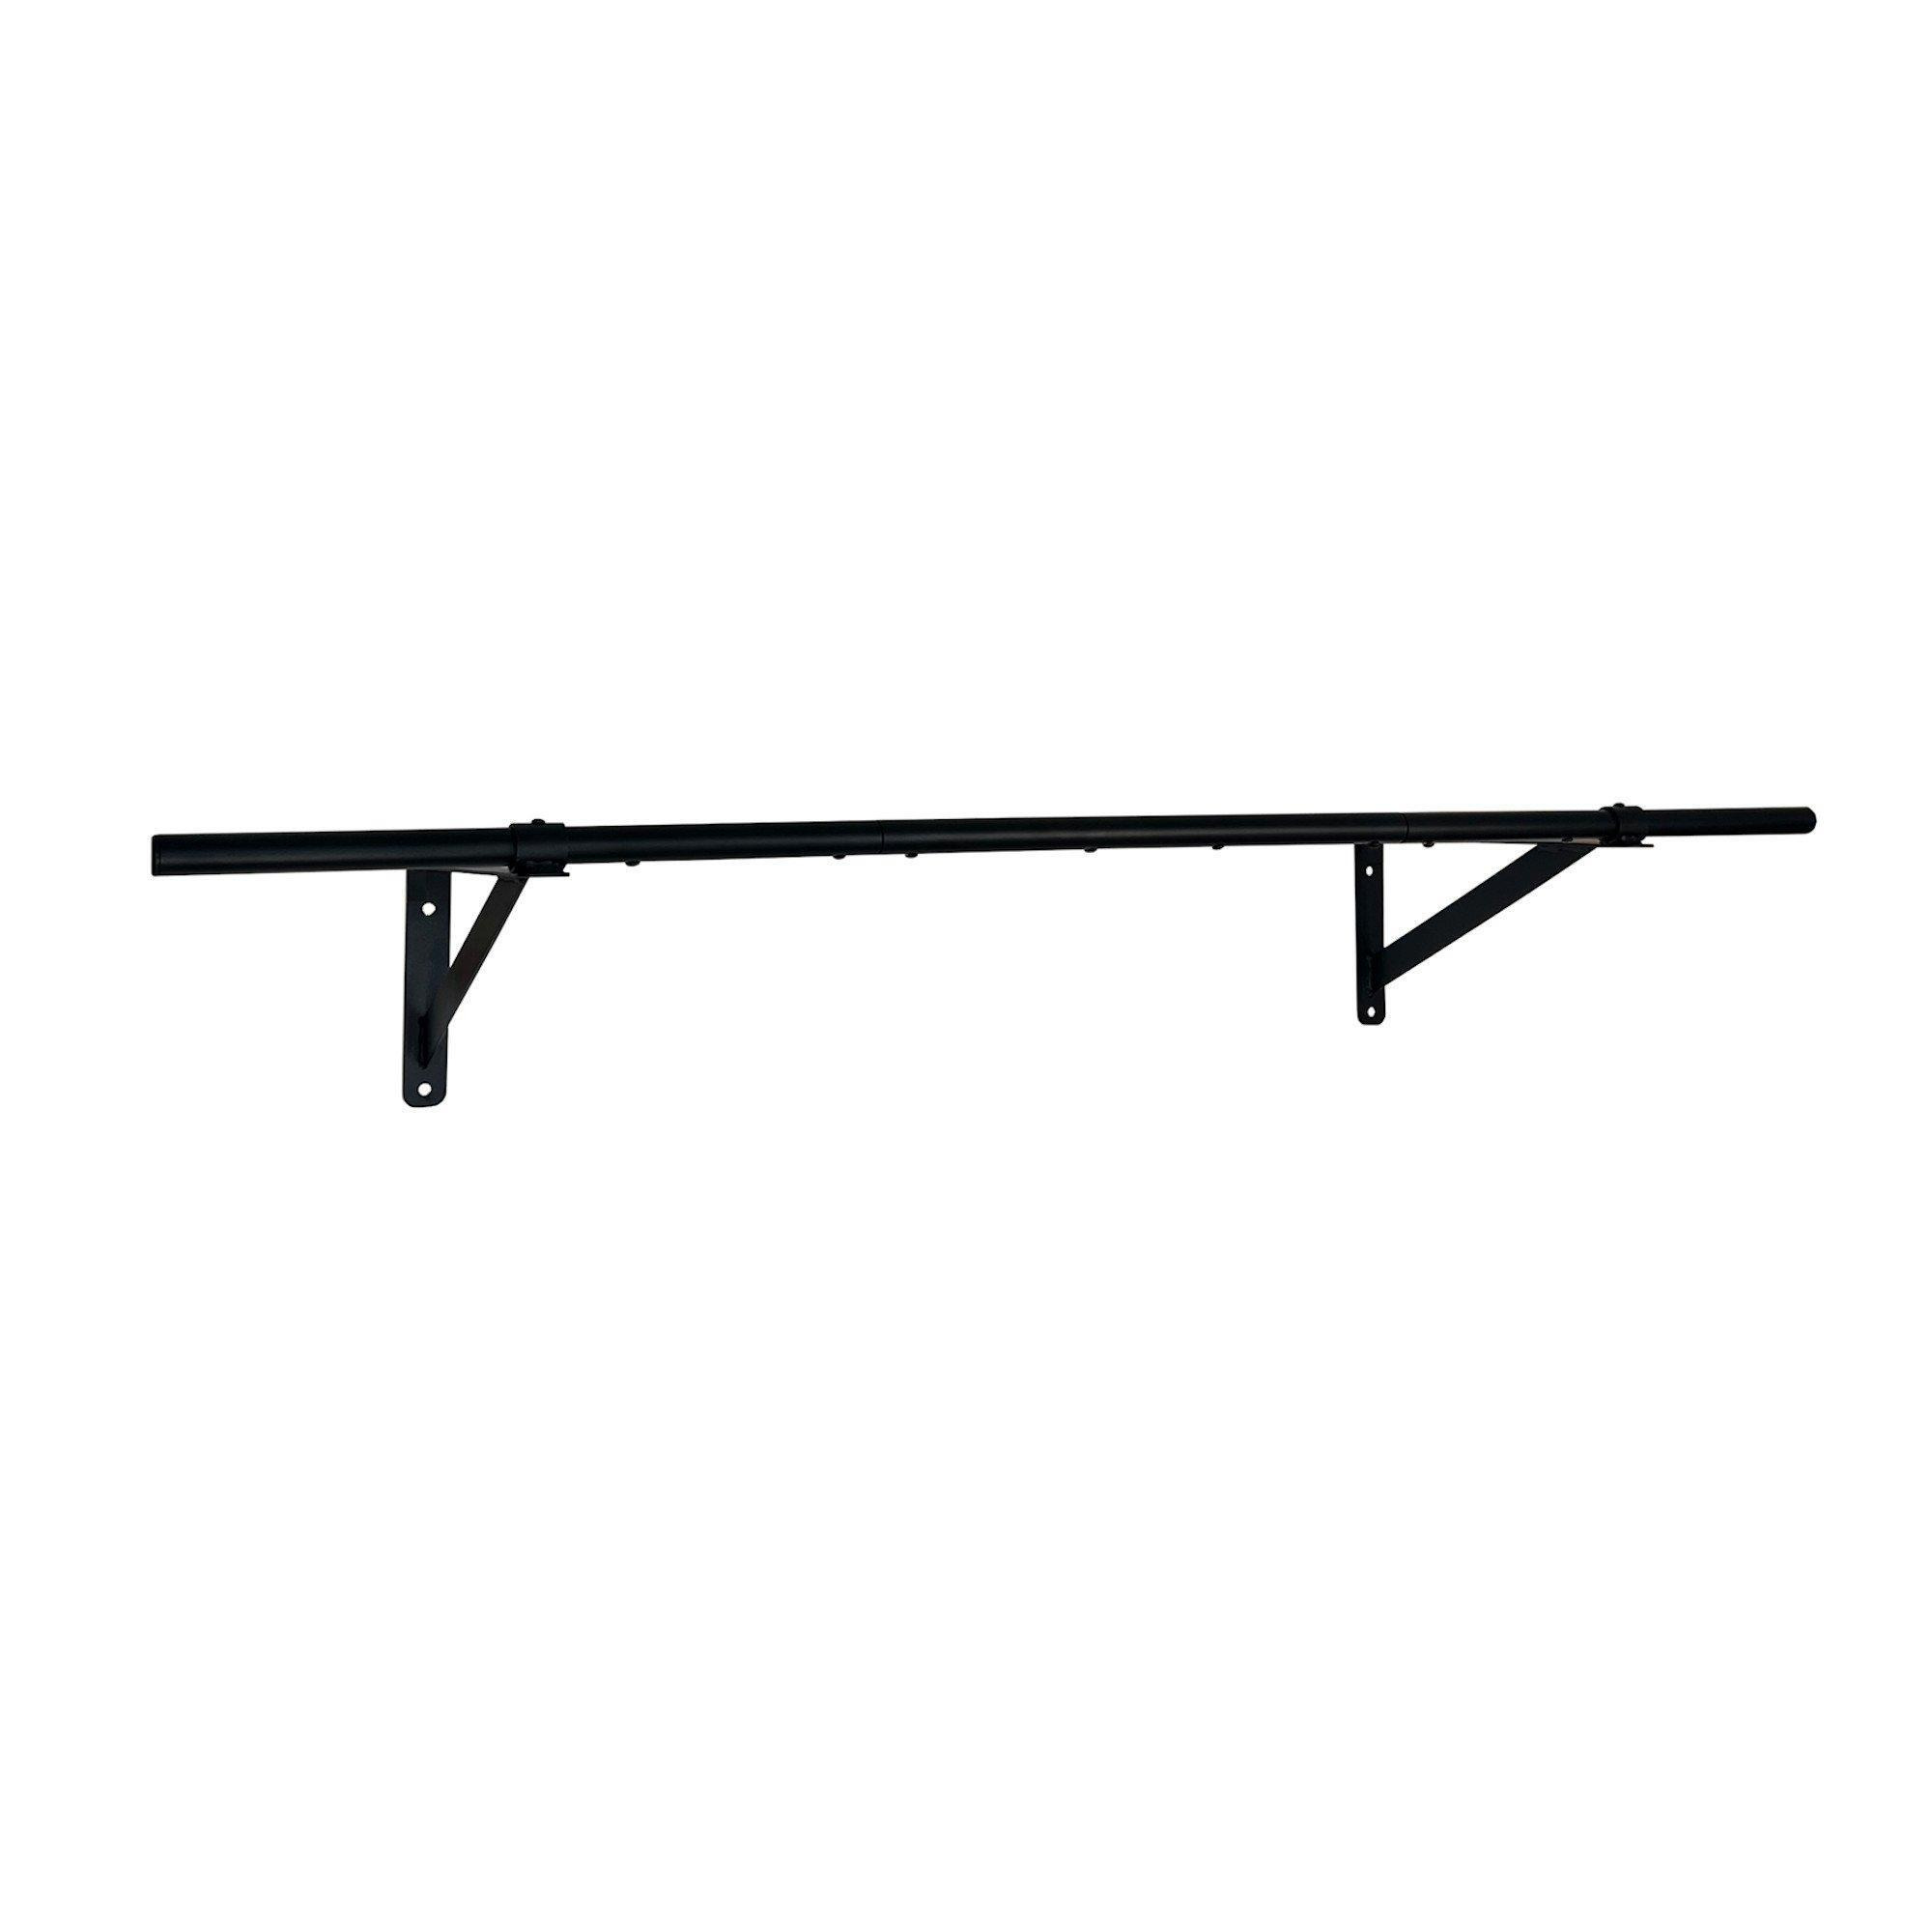 All Metal Super Heavy Wall Mounted Garment Clothes Rail - 4ft - image 1